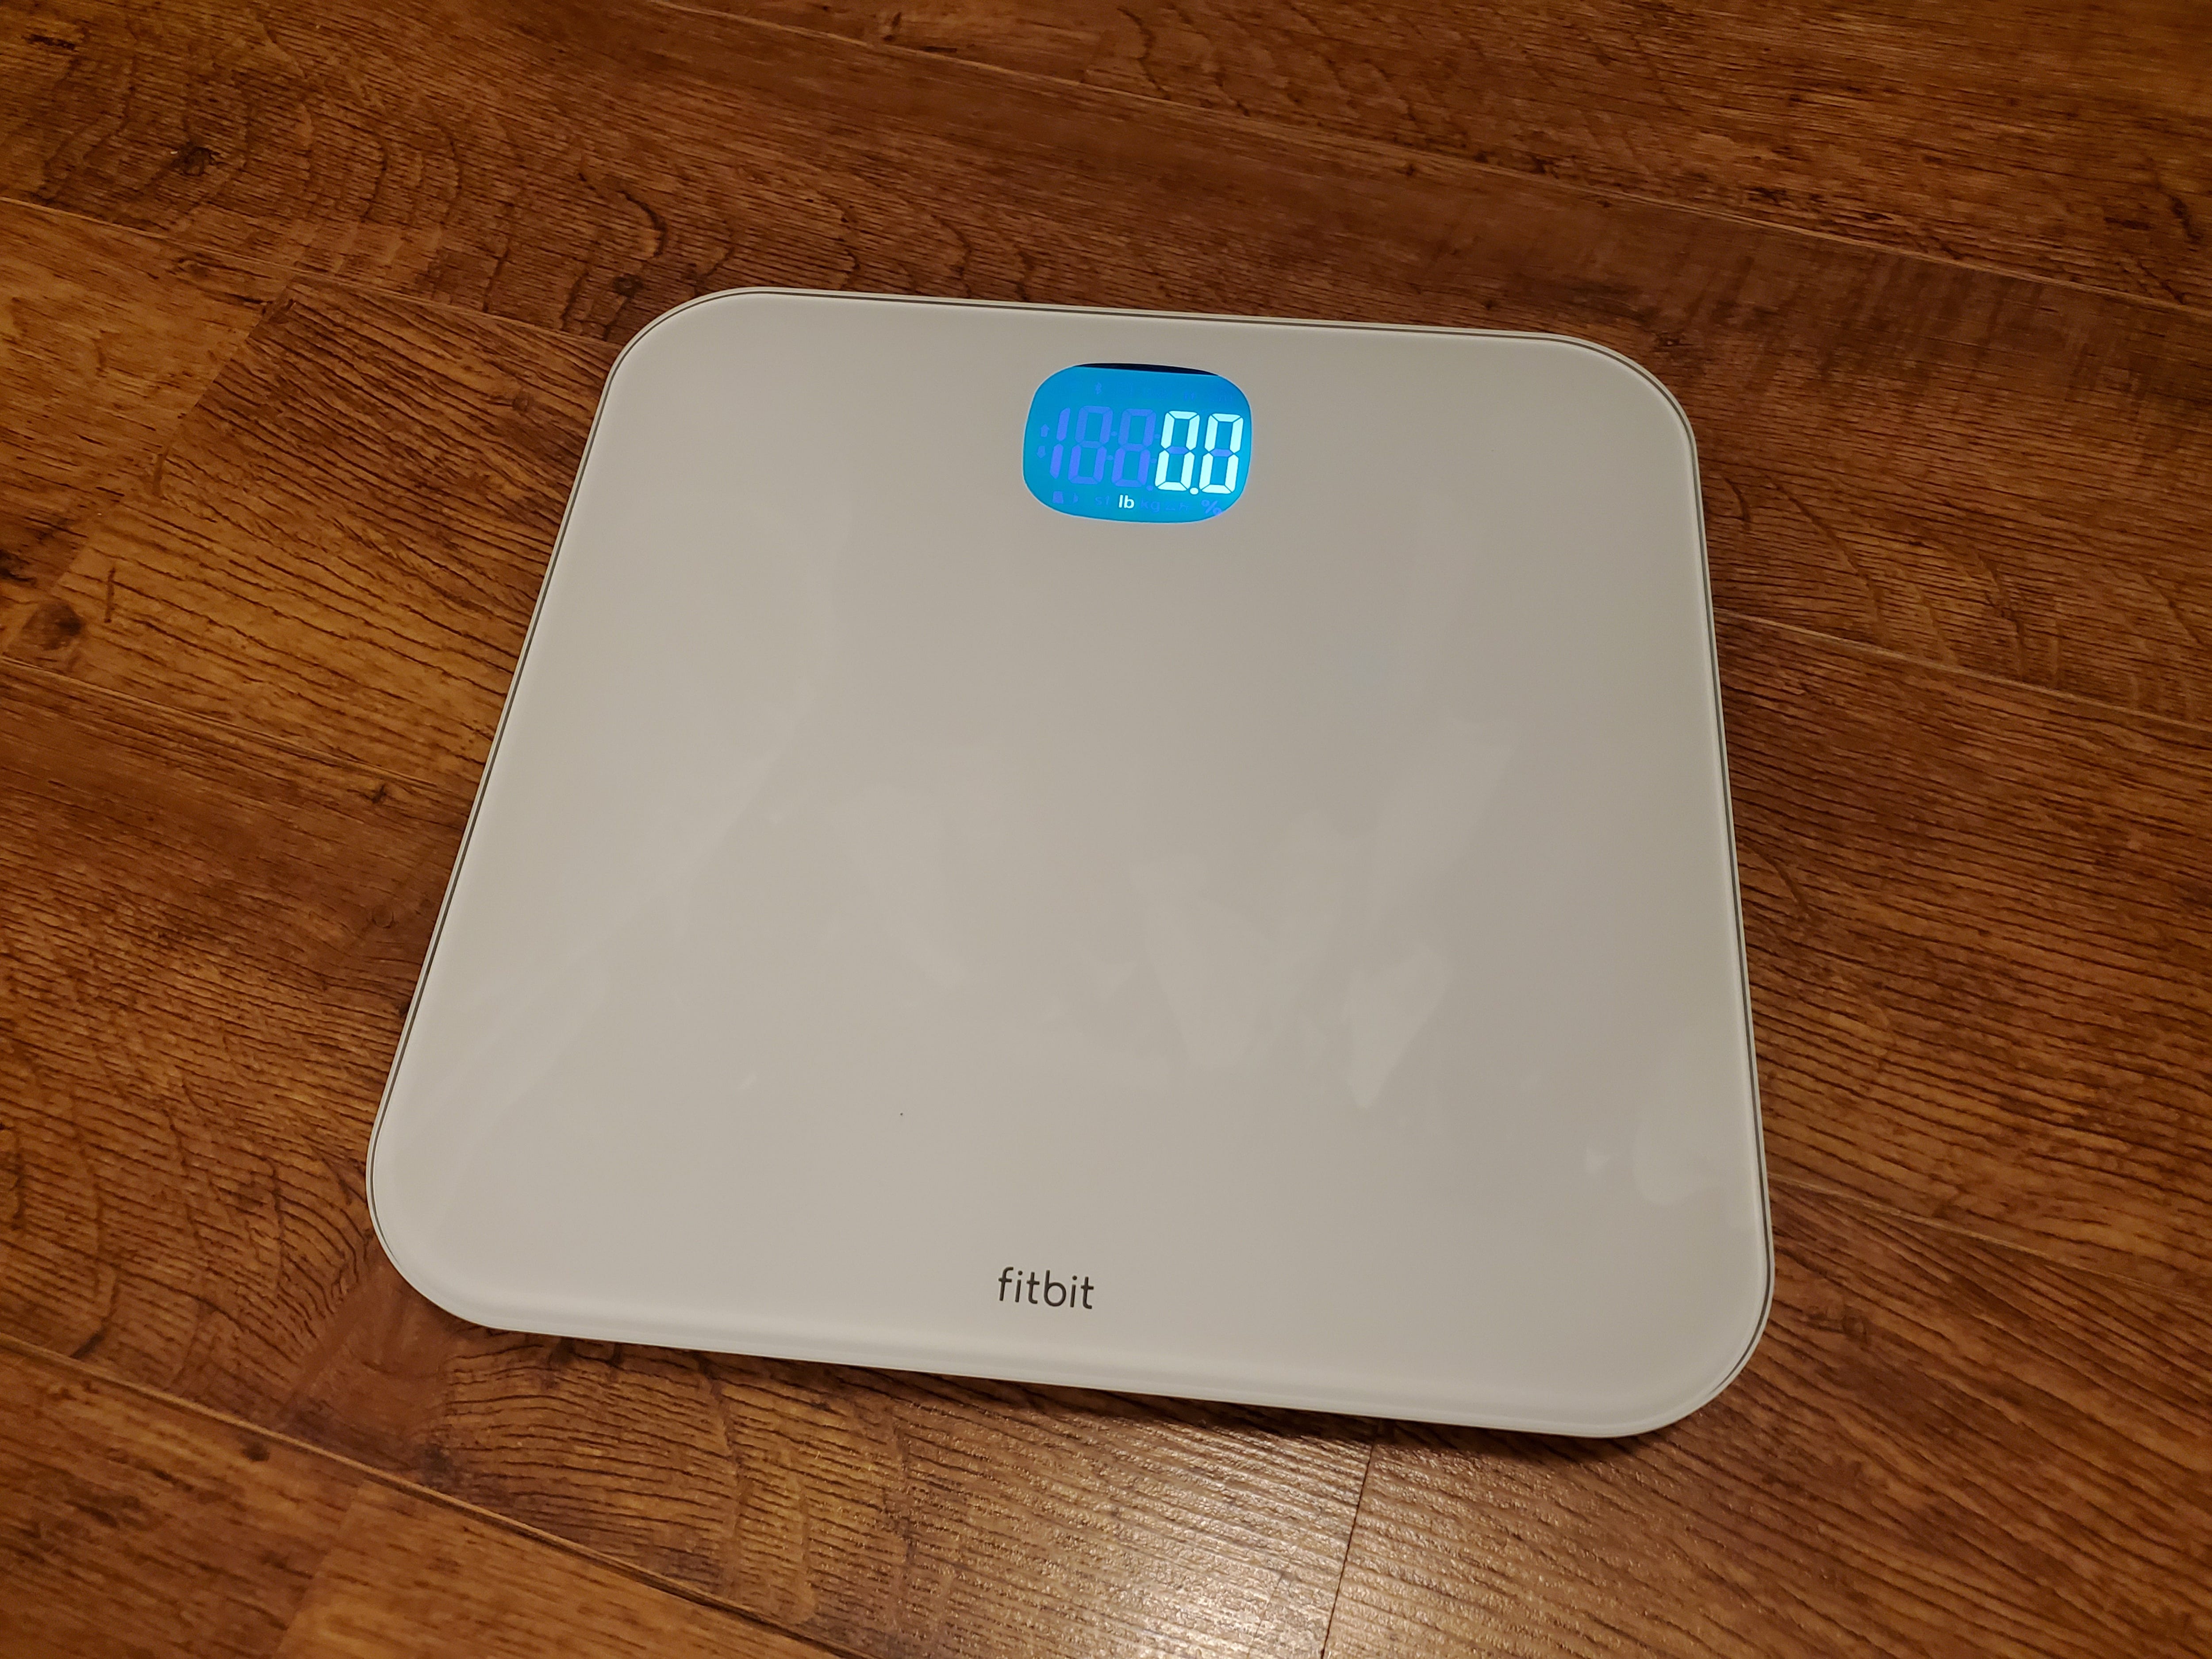 fitbit air scale